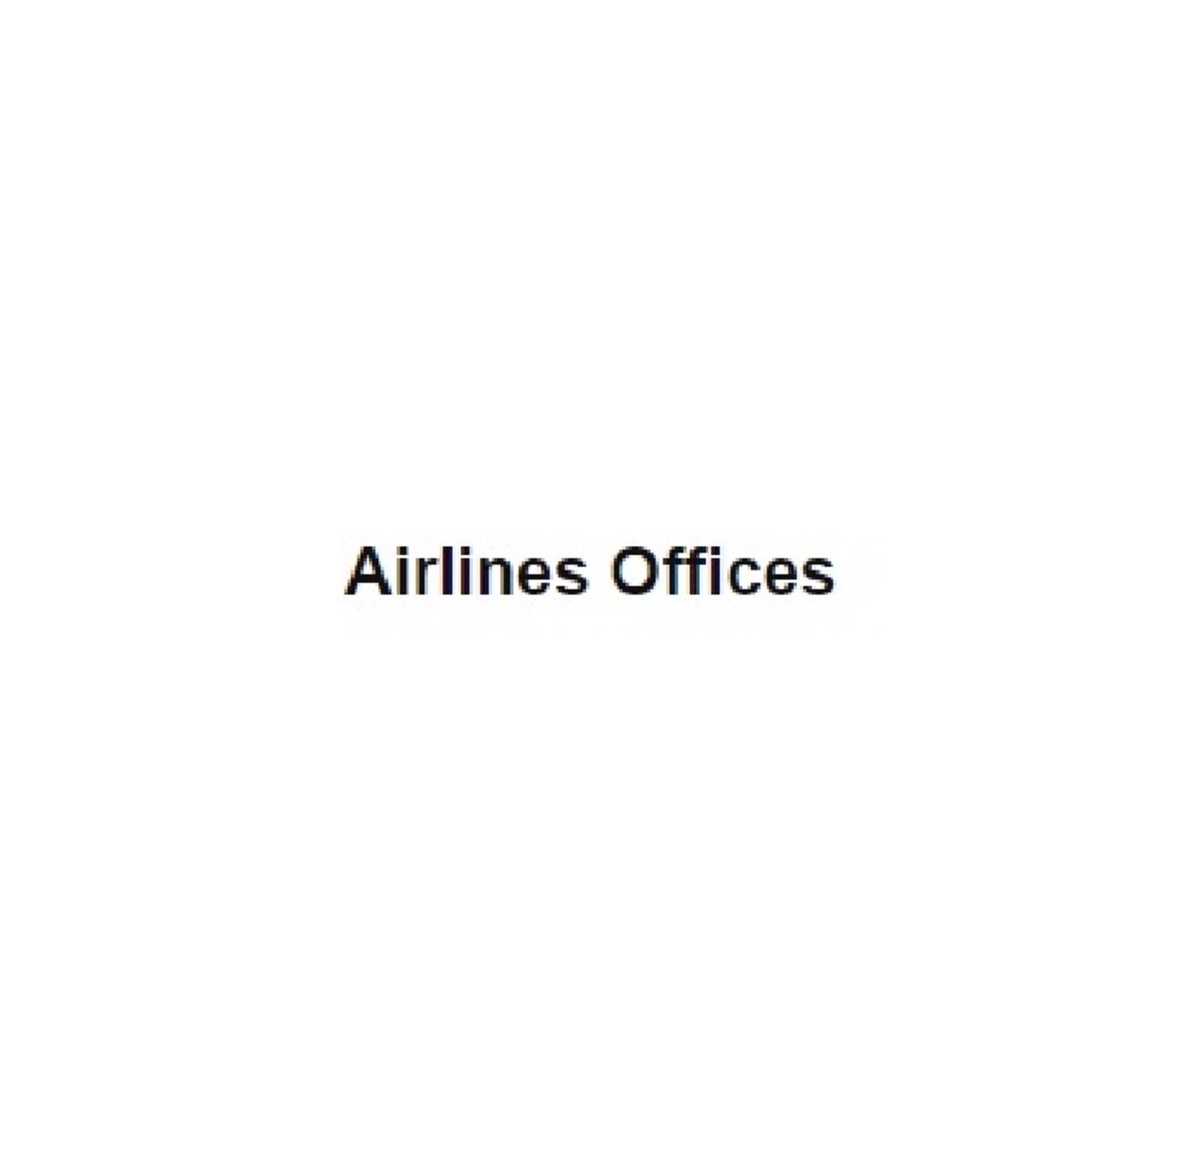 Comprehensive Information On Airline Offices